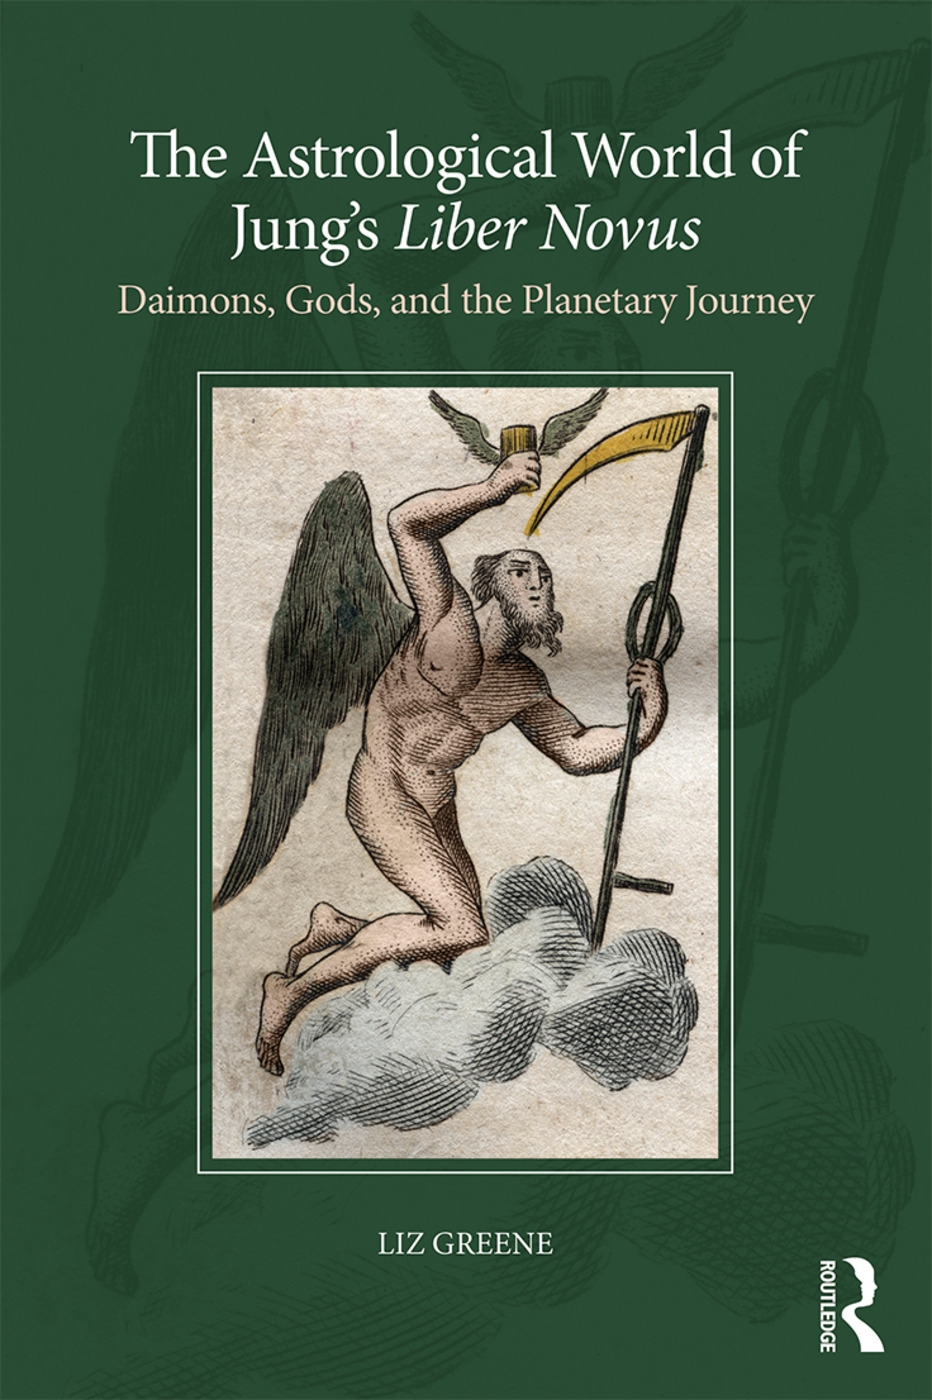 The Astrological World of Jung’s ’liber Novus’: Daimons, Gods, and the Planetary Journey